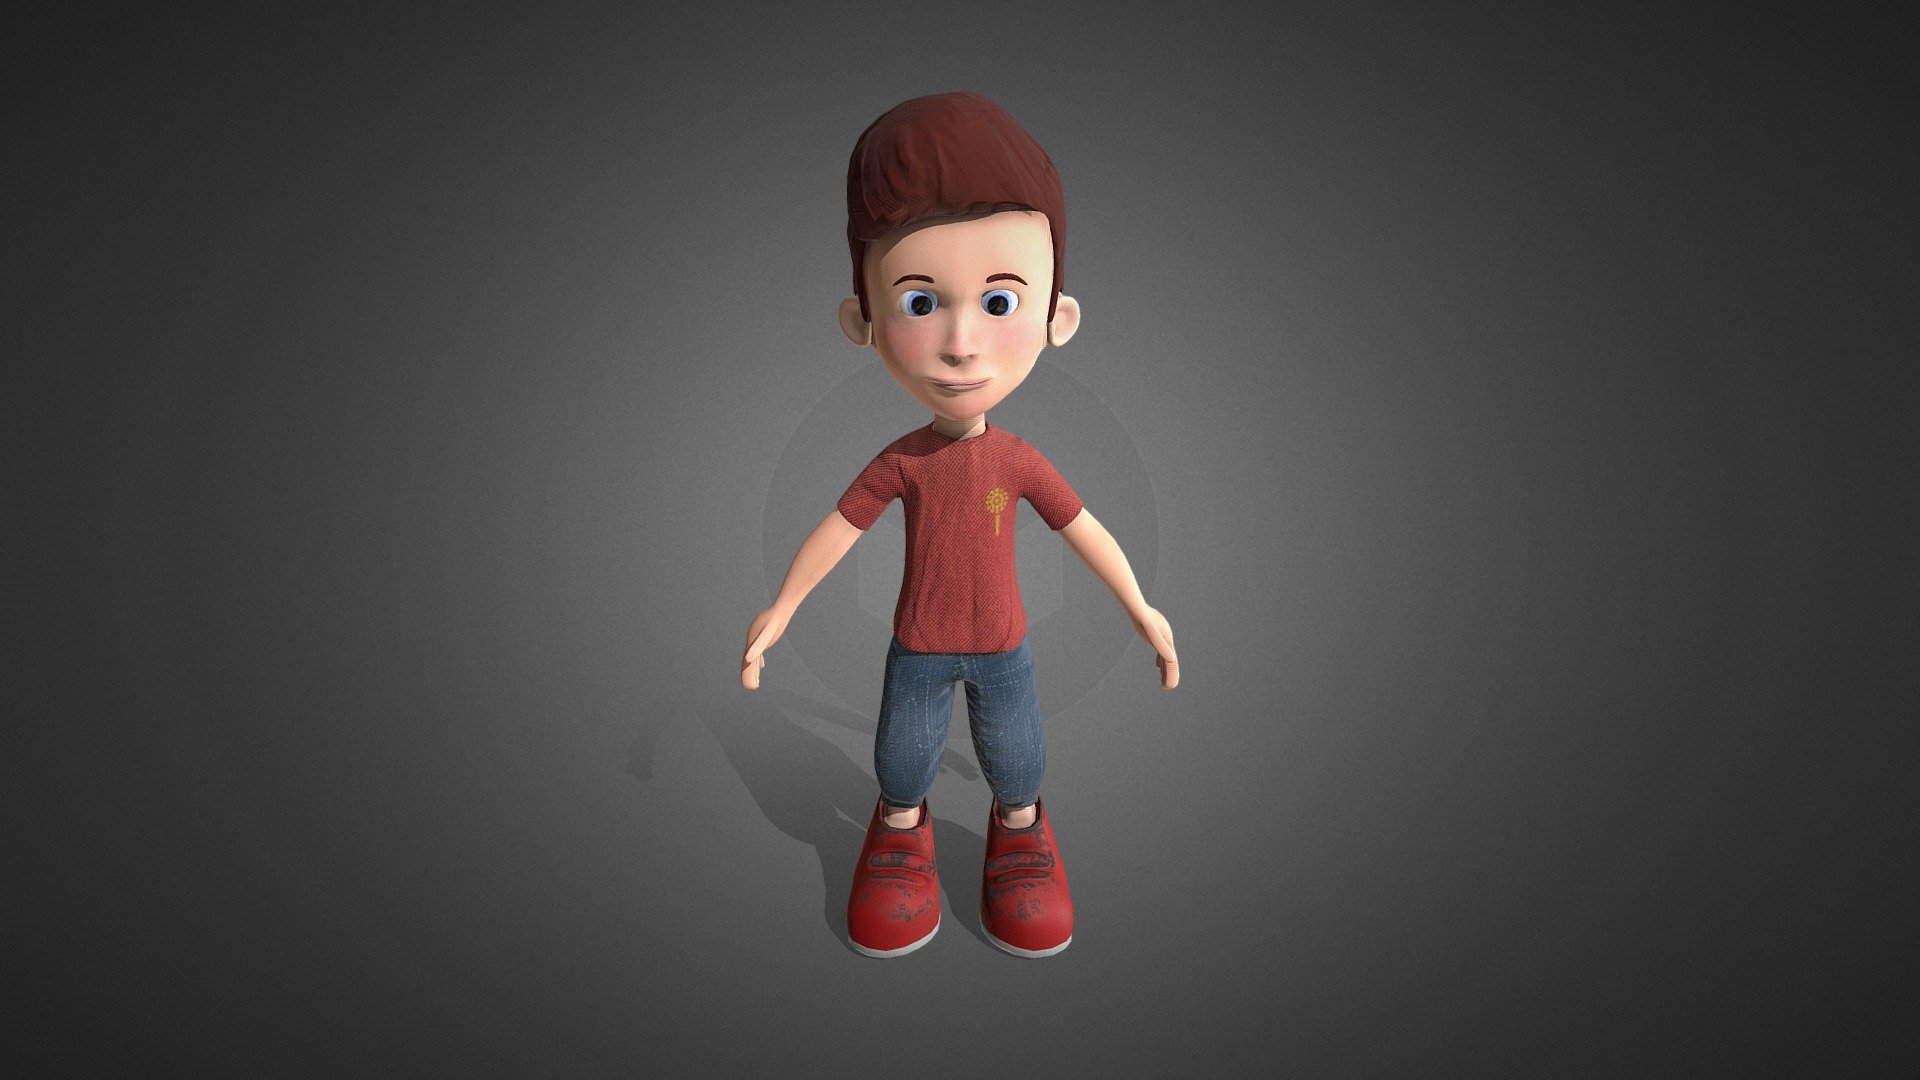 You can name this cartoon boy character anything and use it in explainer videos, animated movies, games, educational scenes etc. Free download available.

For more such cool and interesting content follow us on: https://www.instagram.com/neshallads/
 Drop Your Comments &amp; Reviews!

Visit Us! https://neshallads.com/ - Boy Character - Cartoon - Download Free 3D model by neshallads 3d model